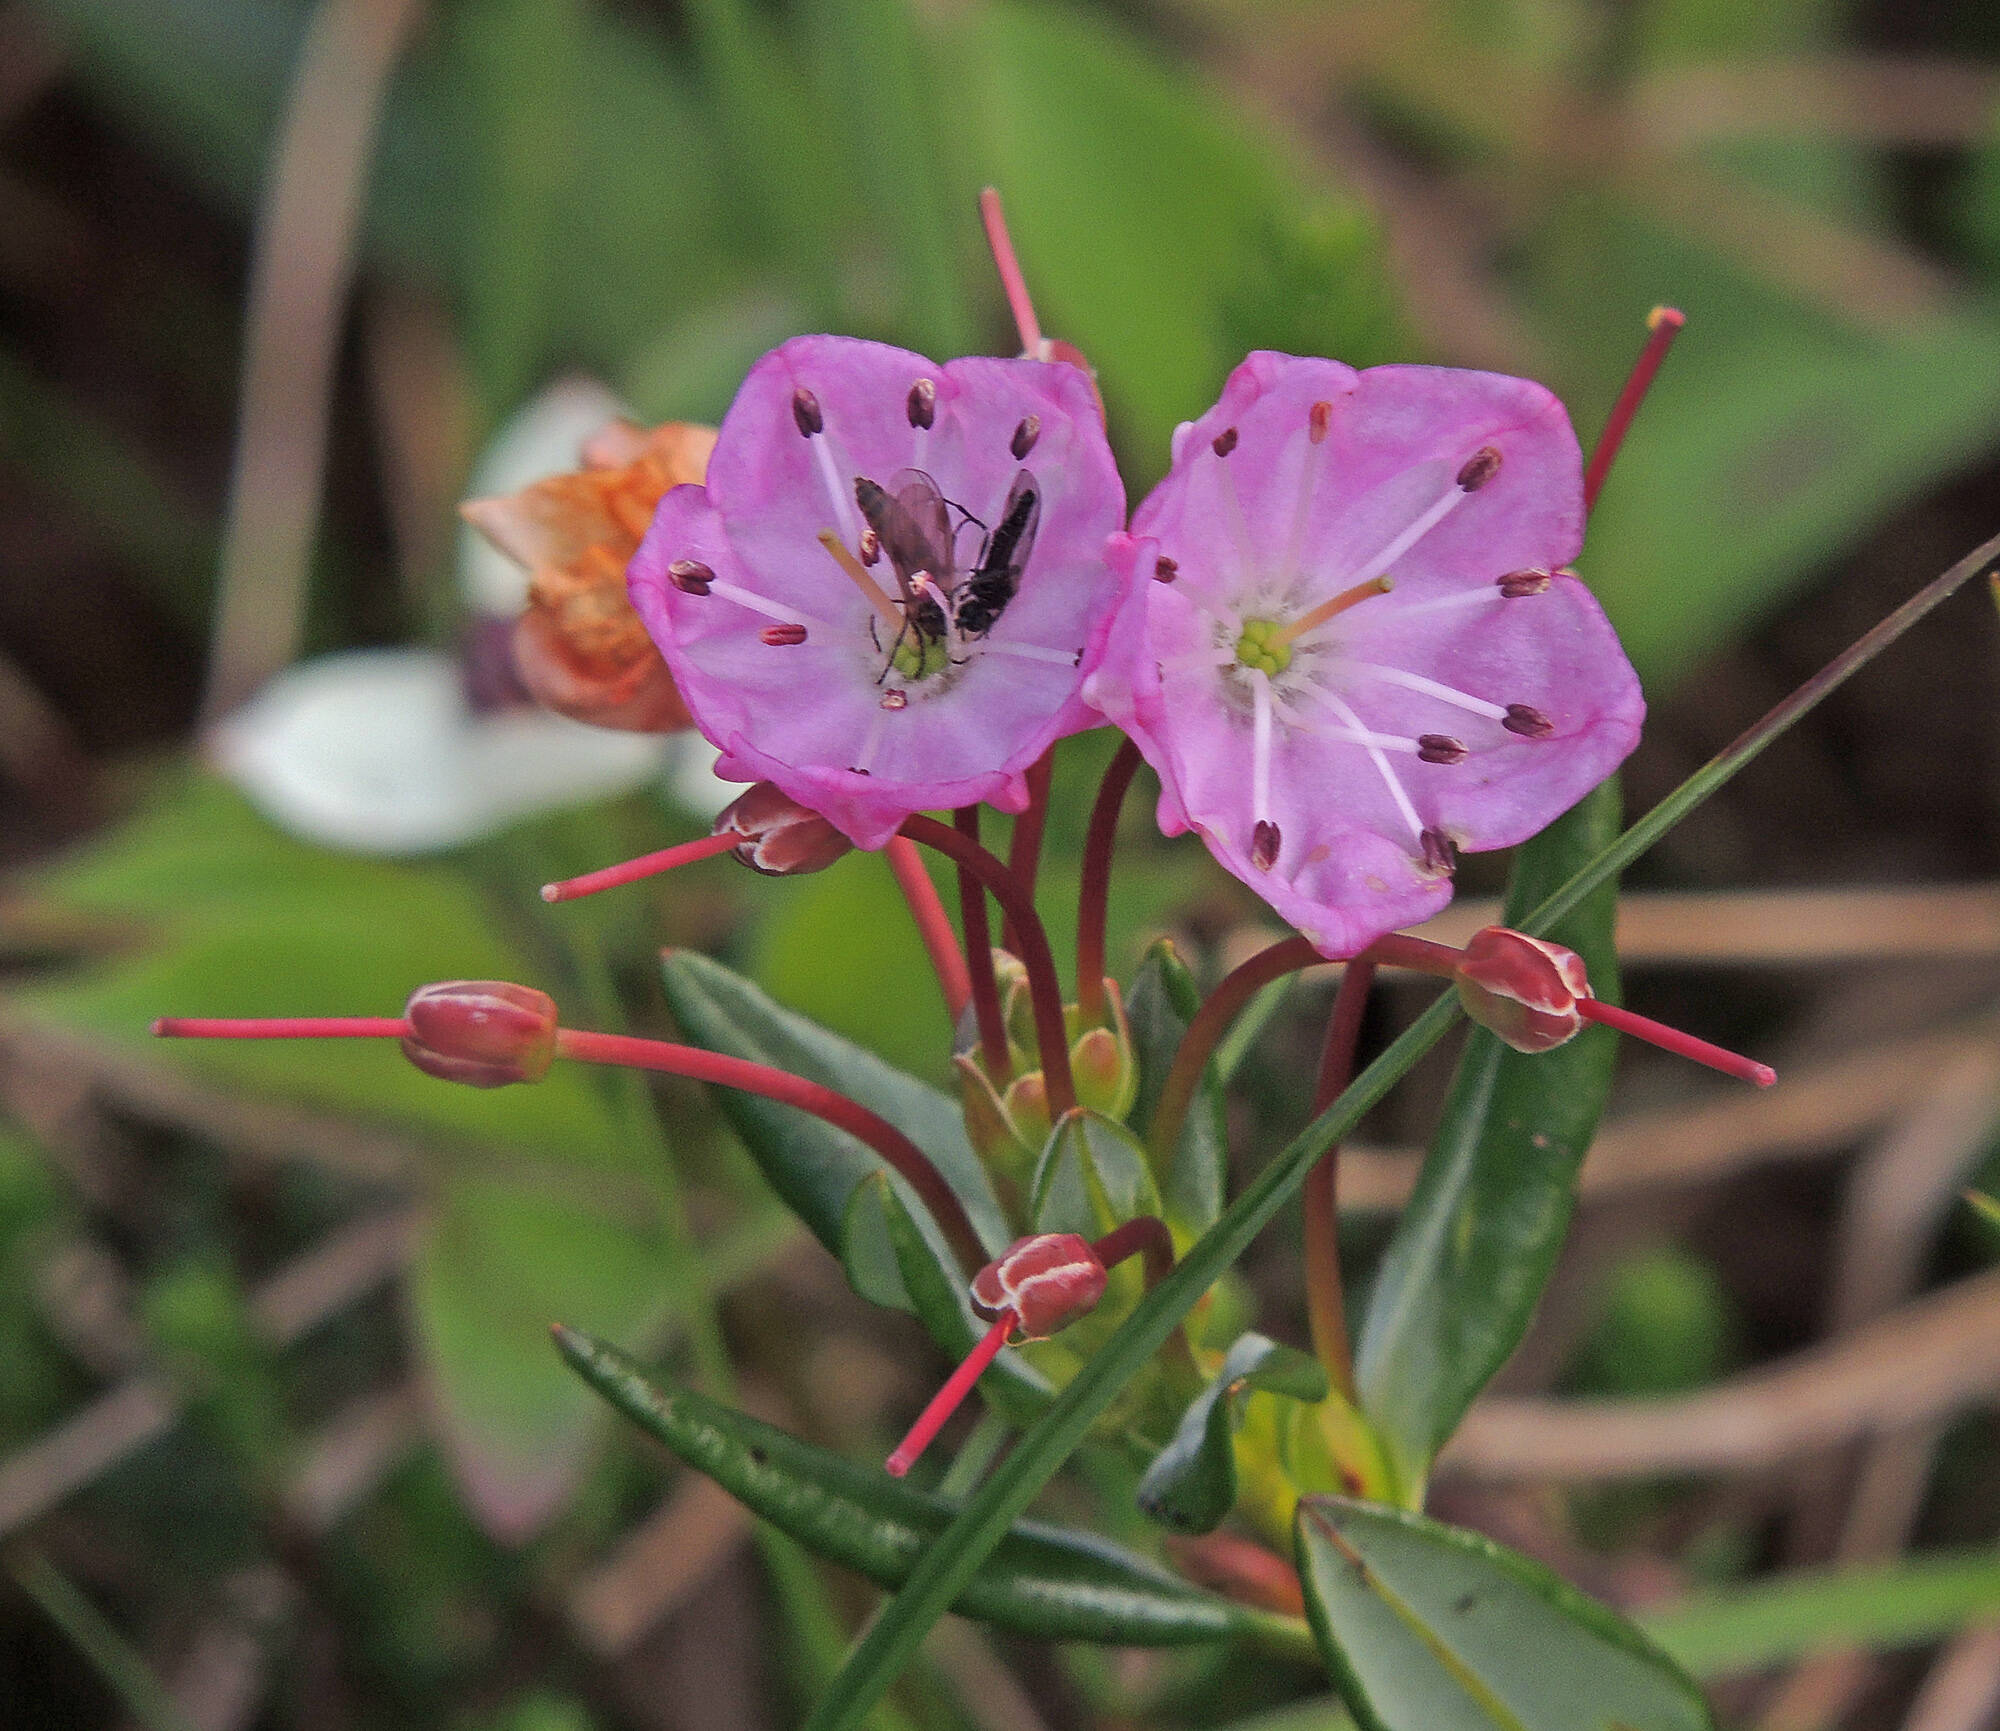 Bog laurel plants are toxic to mammals; pollinating bees that feed on the pollen make toxic honey. (Courtesy Photo / Bob Armstrong)